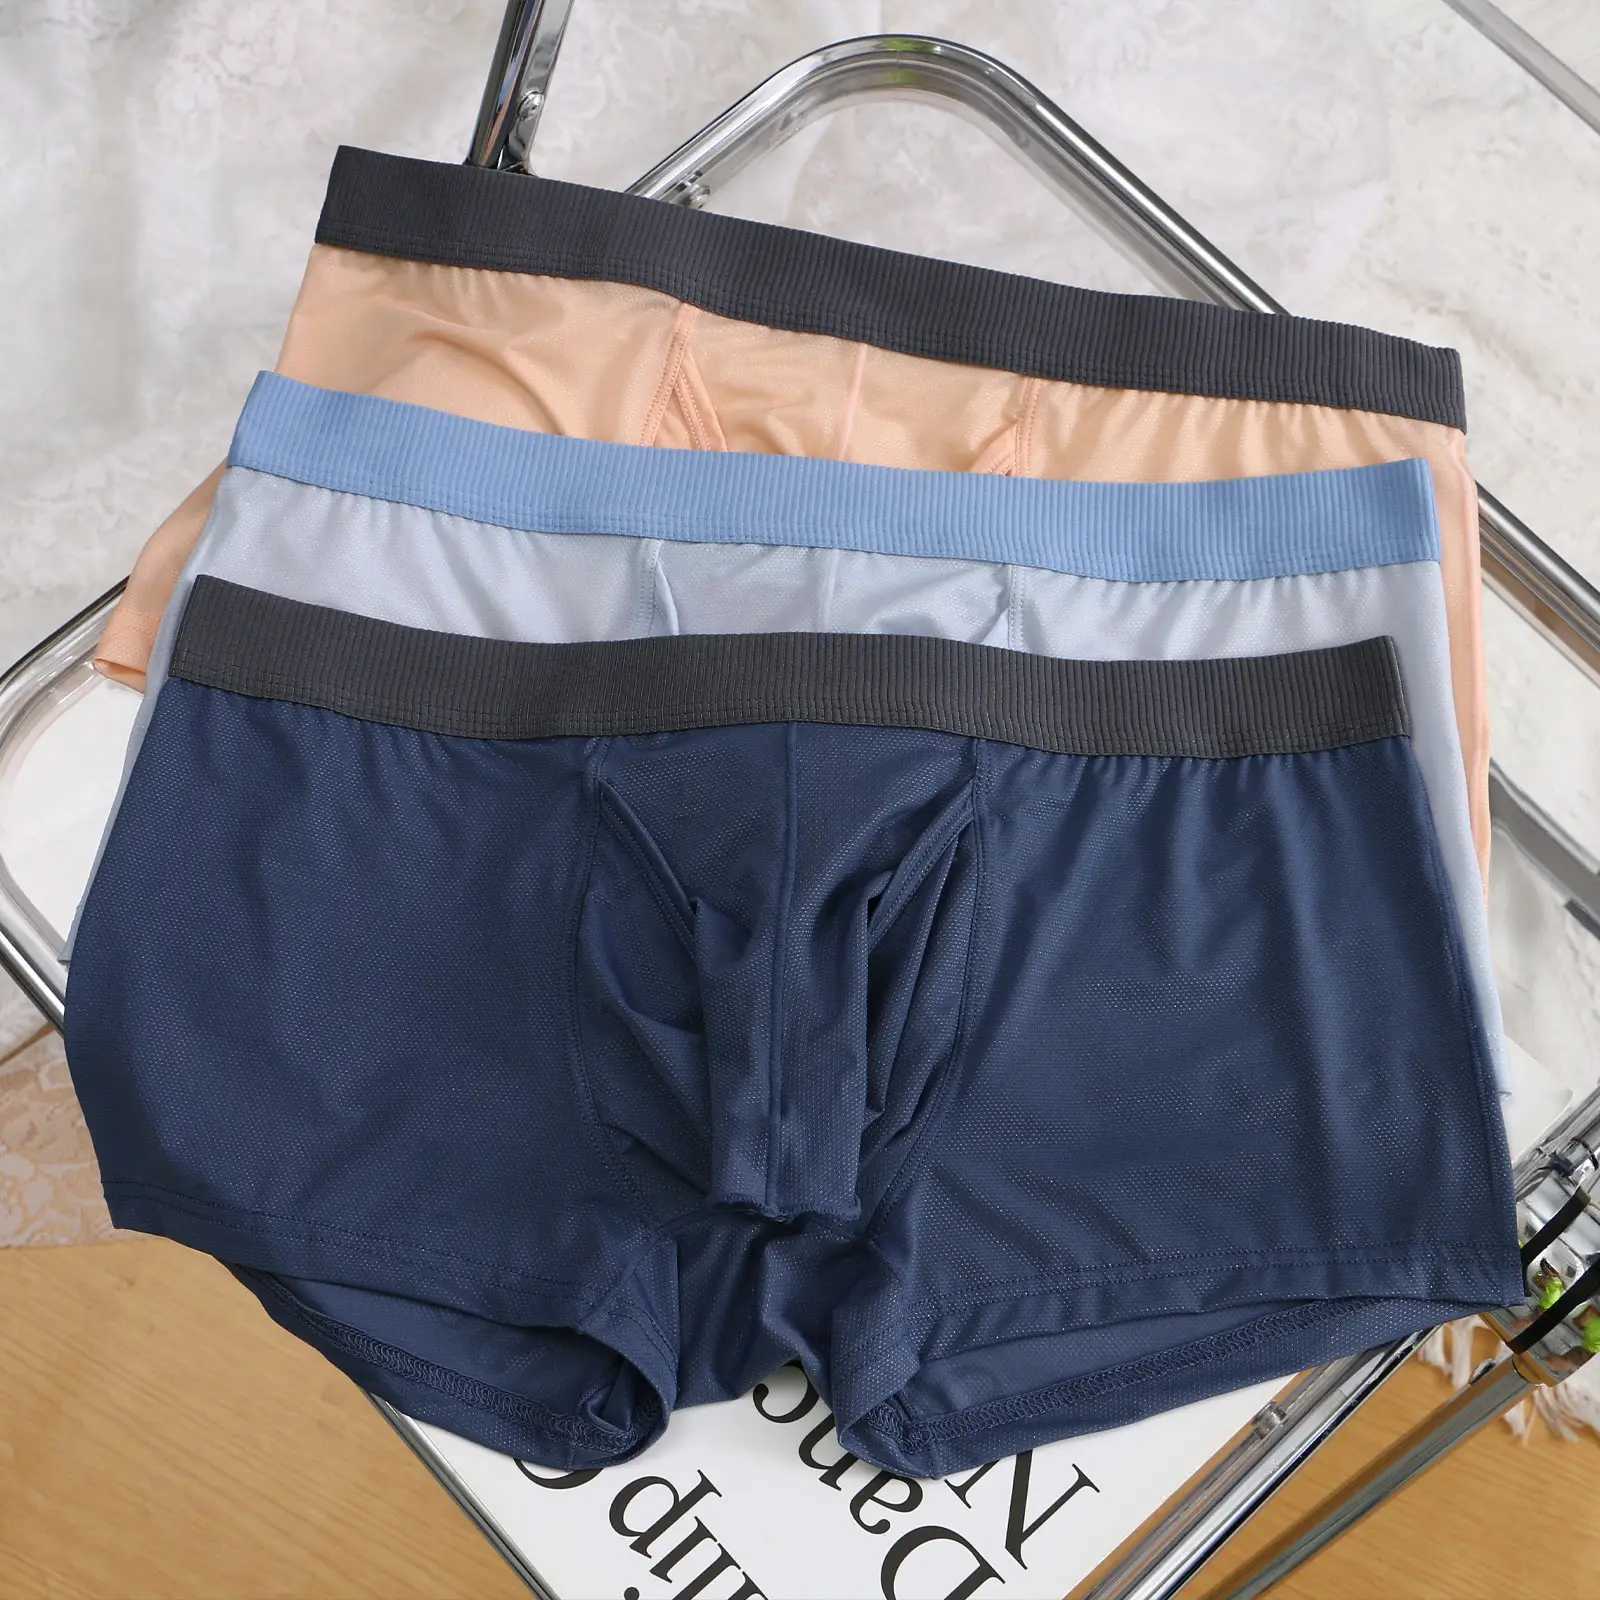 Underpants CLEVER-MENMODE Underwear Sexy Men Boxers Elephant Nose Male Panties Ice Silk U Convex Long Penis Pouch Boxershorts YQ240214